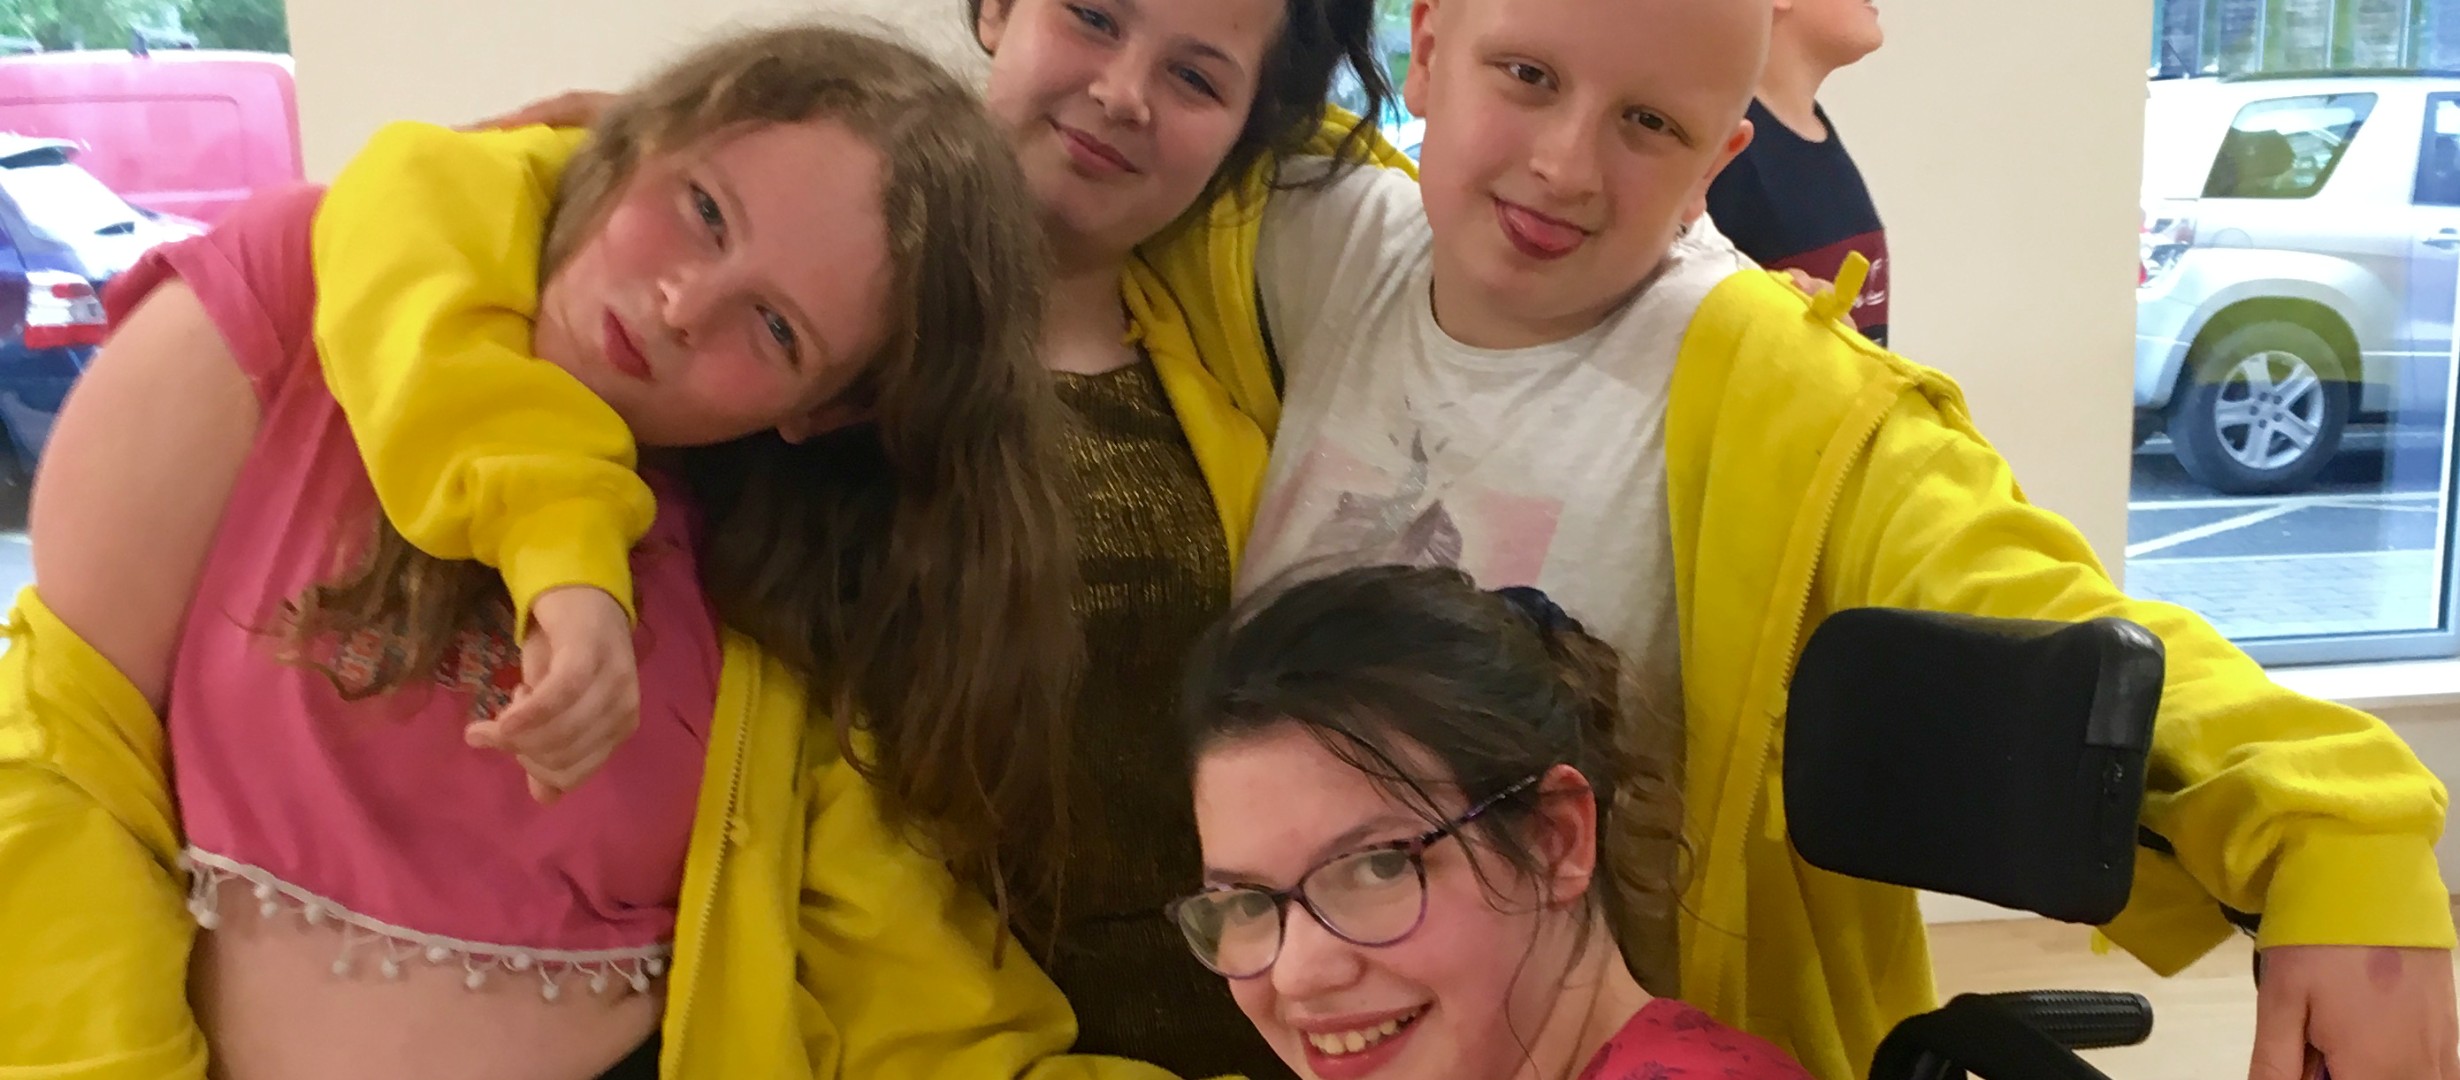 Three young people stood with their arms around each others shoulders. One young person sat in front of the three in a wheelchair. All are smiling at the camera.